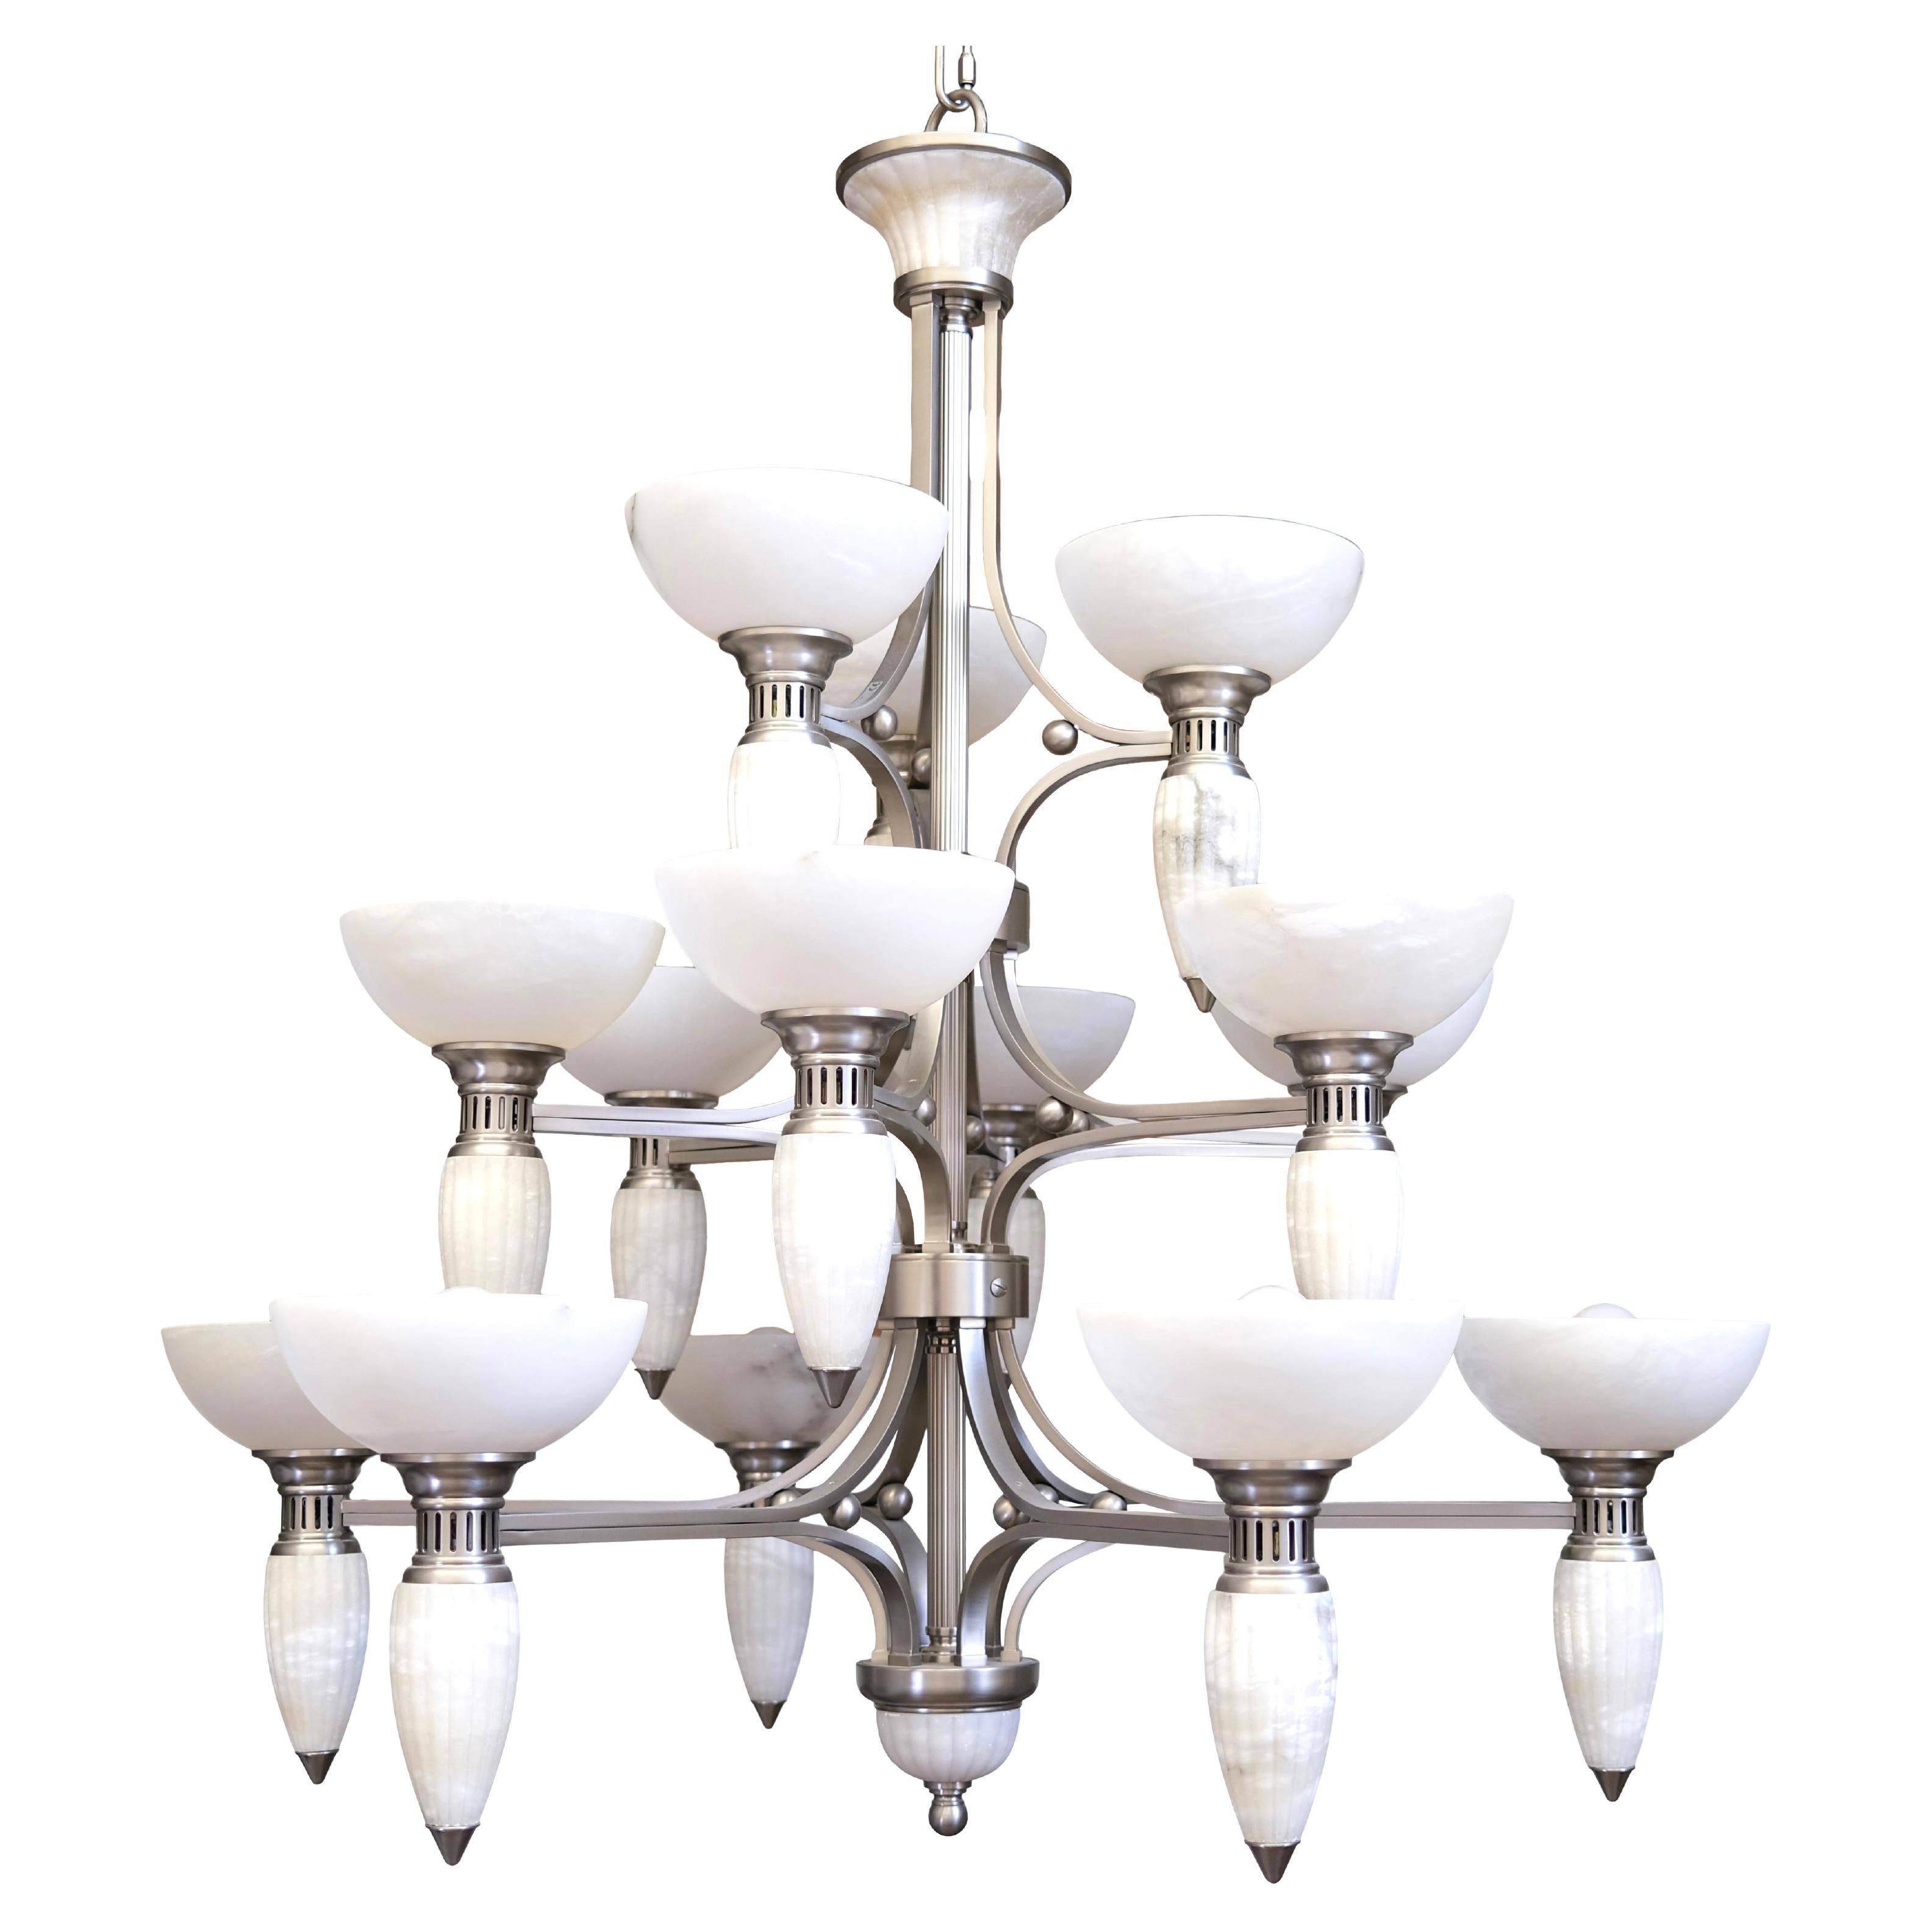 15-Arm Art Deco Style Chandelier with Alabaster Bowls and Illuminated Cones For Sale